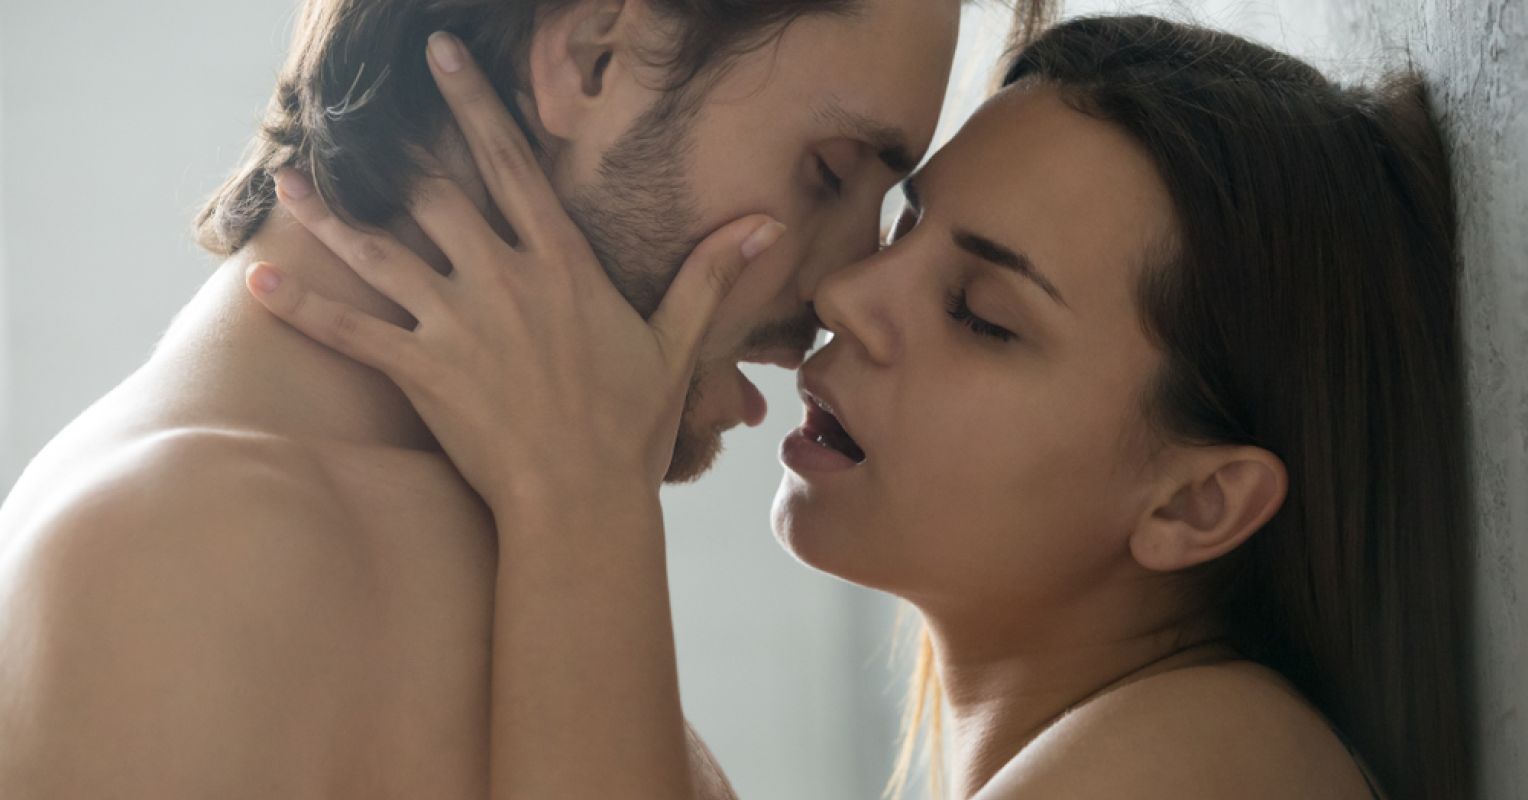 Why We Scream and Moan During Sex Psychology Today photo